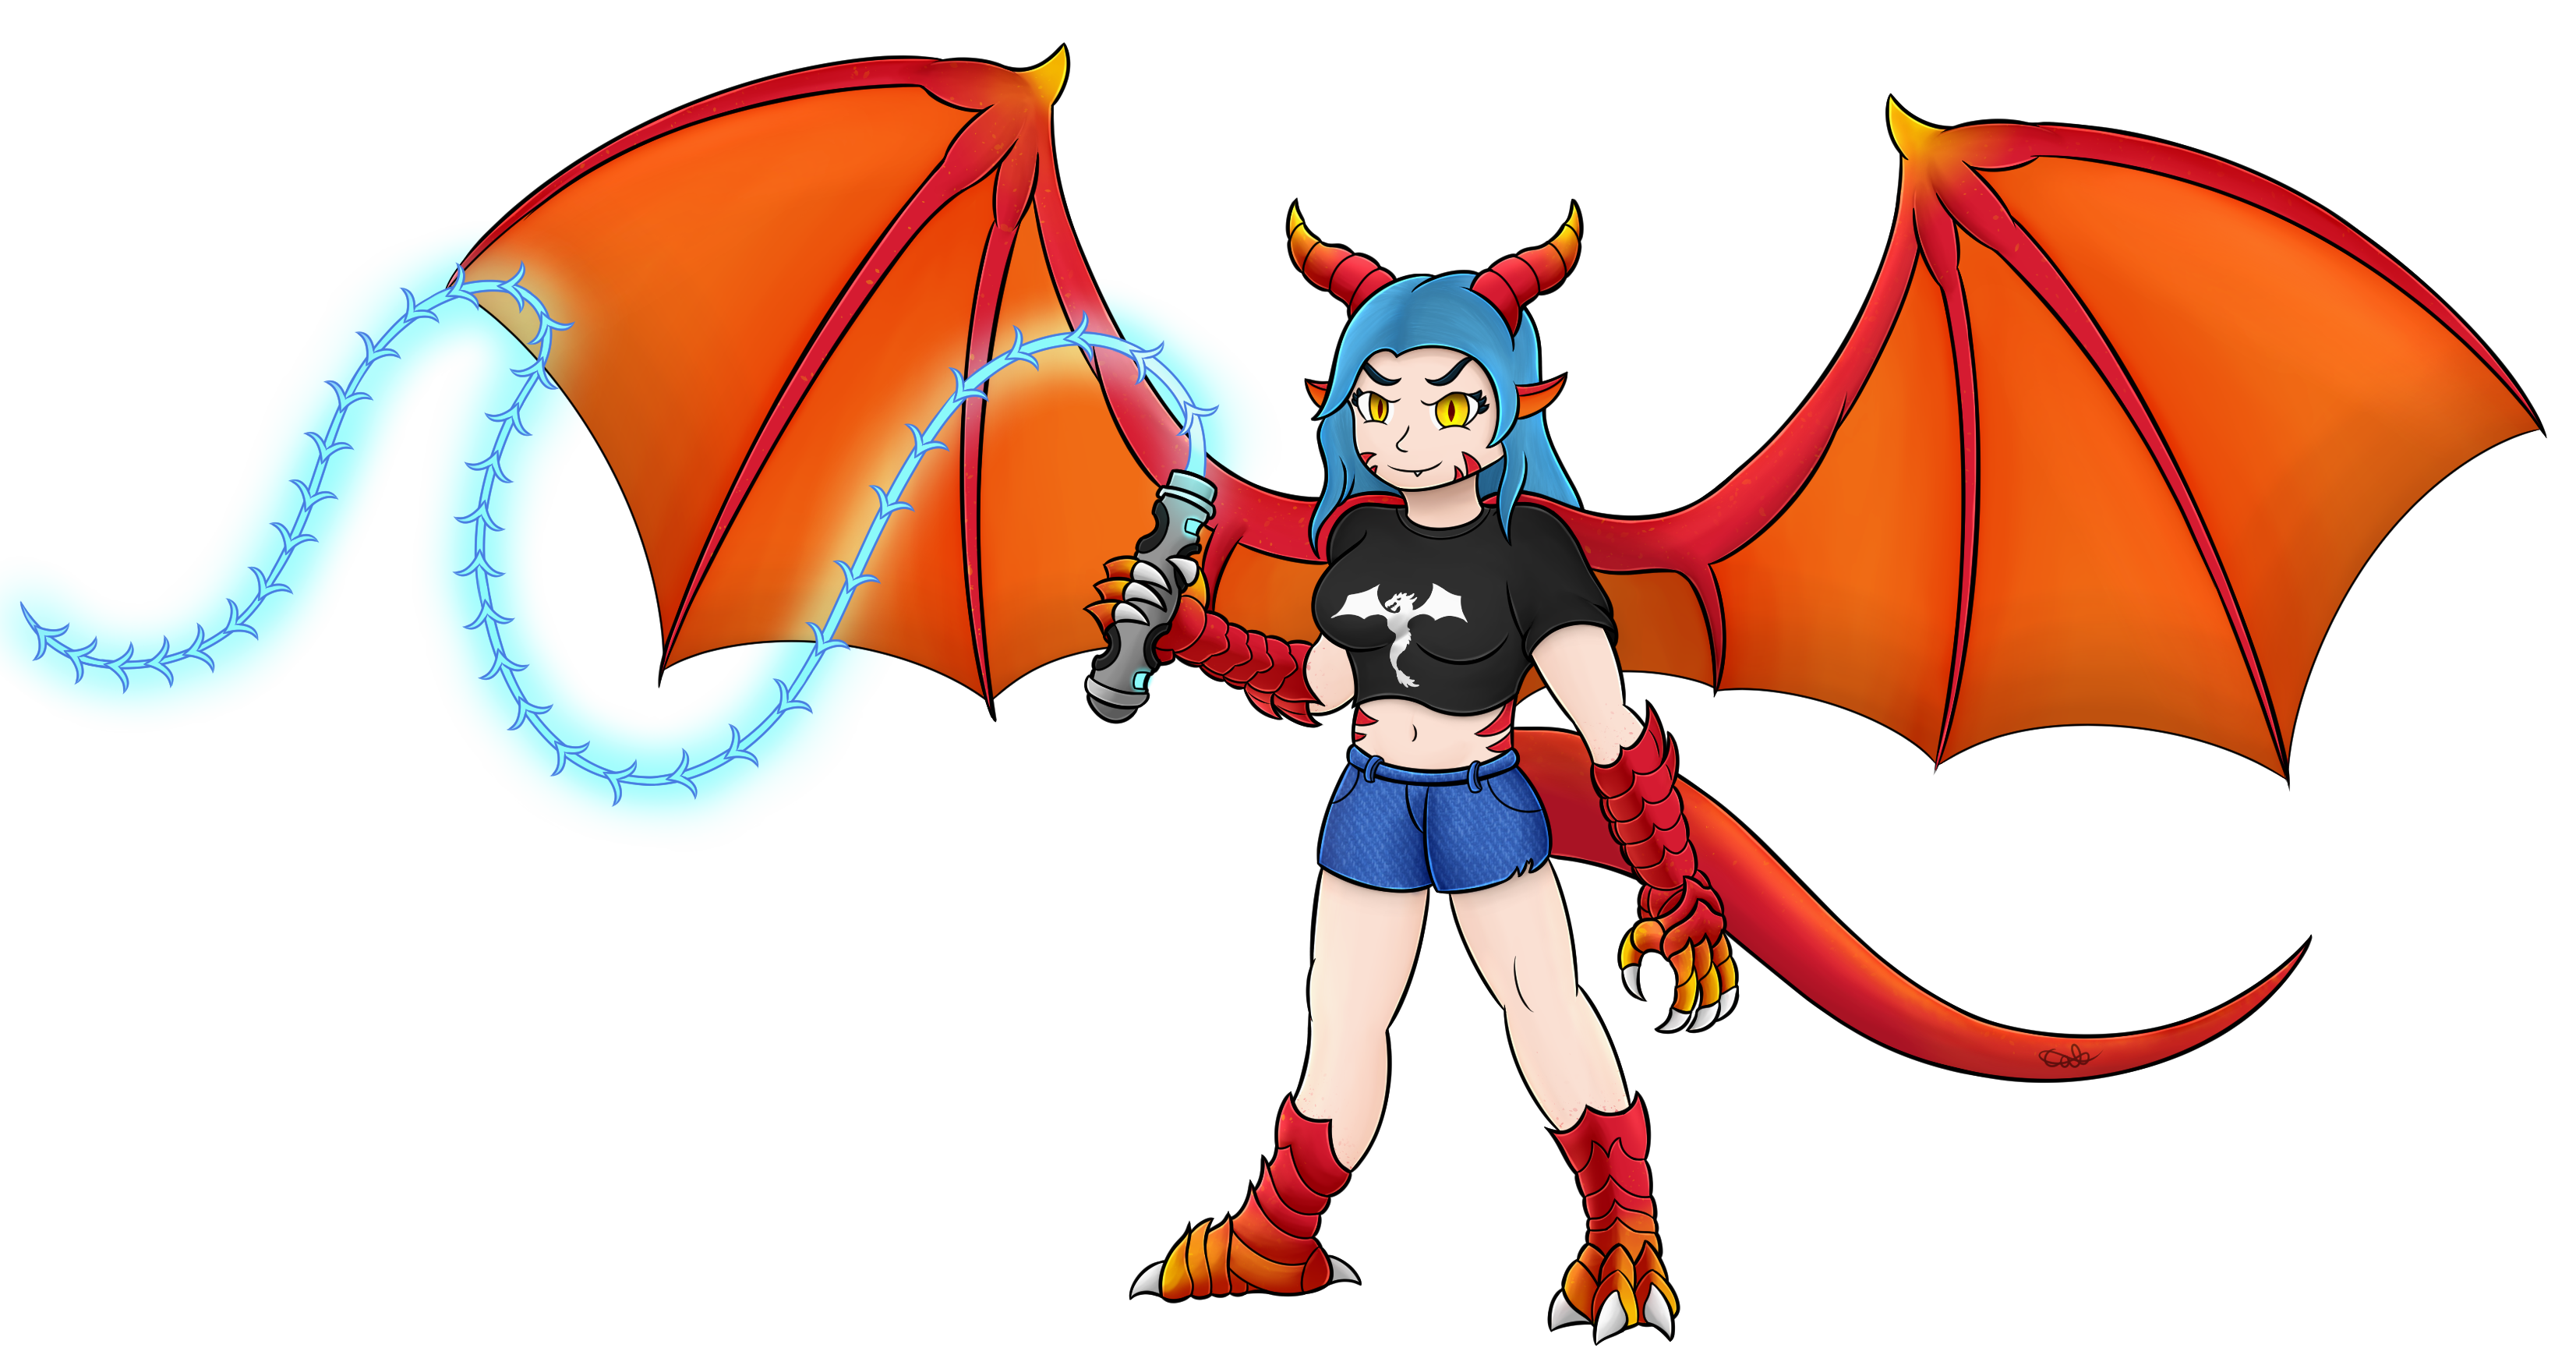 dragon_gal_by_calem28-dcey23k.png